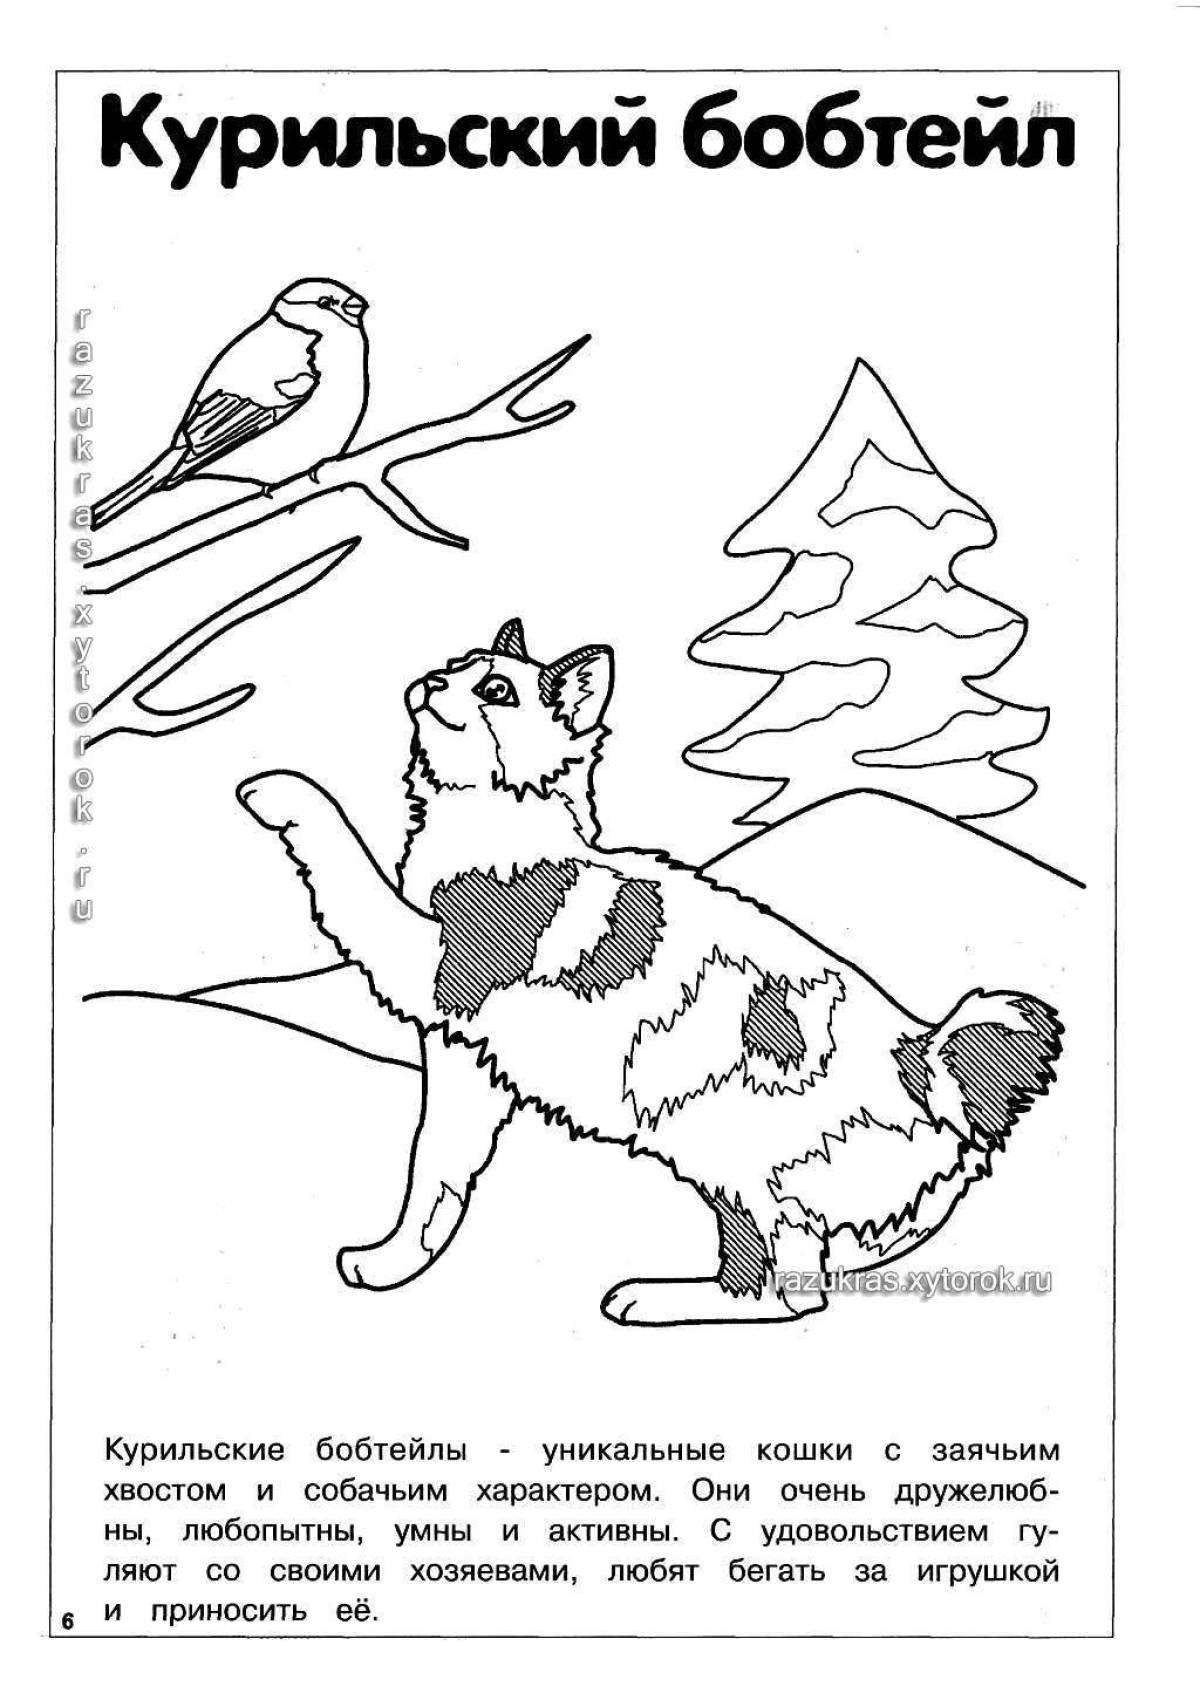 Playful cat breed coloring book